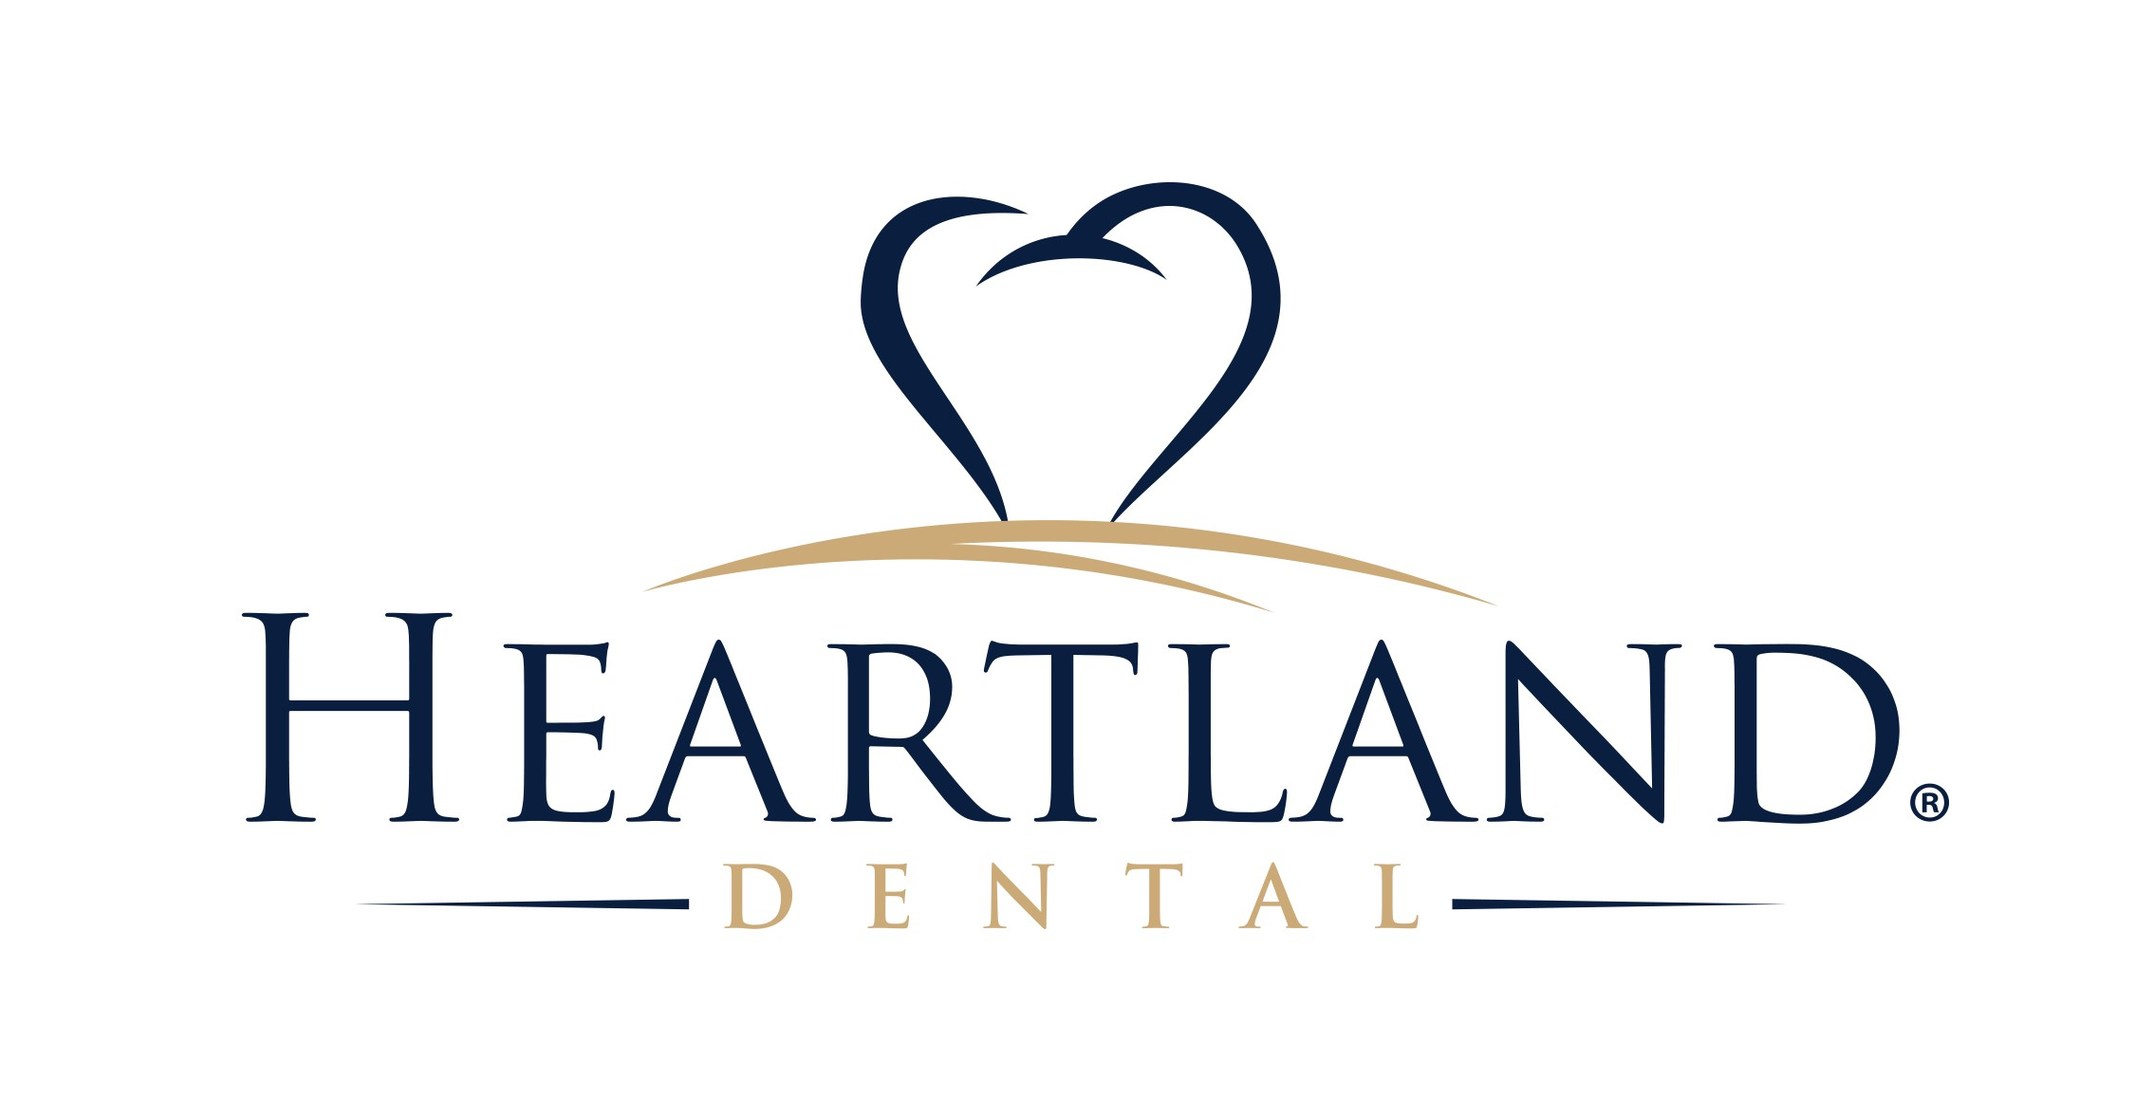 Heartland Dental Celebrates Record Growth Year in 2022 with Continued